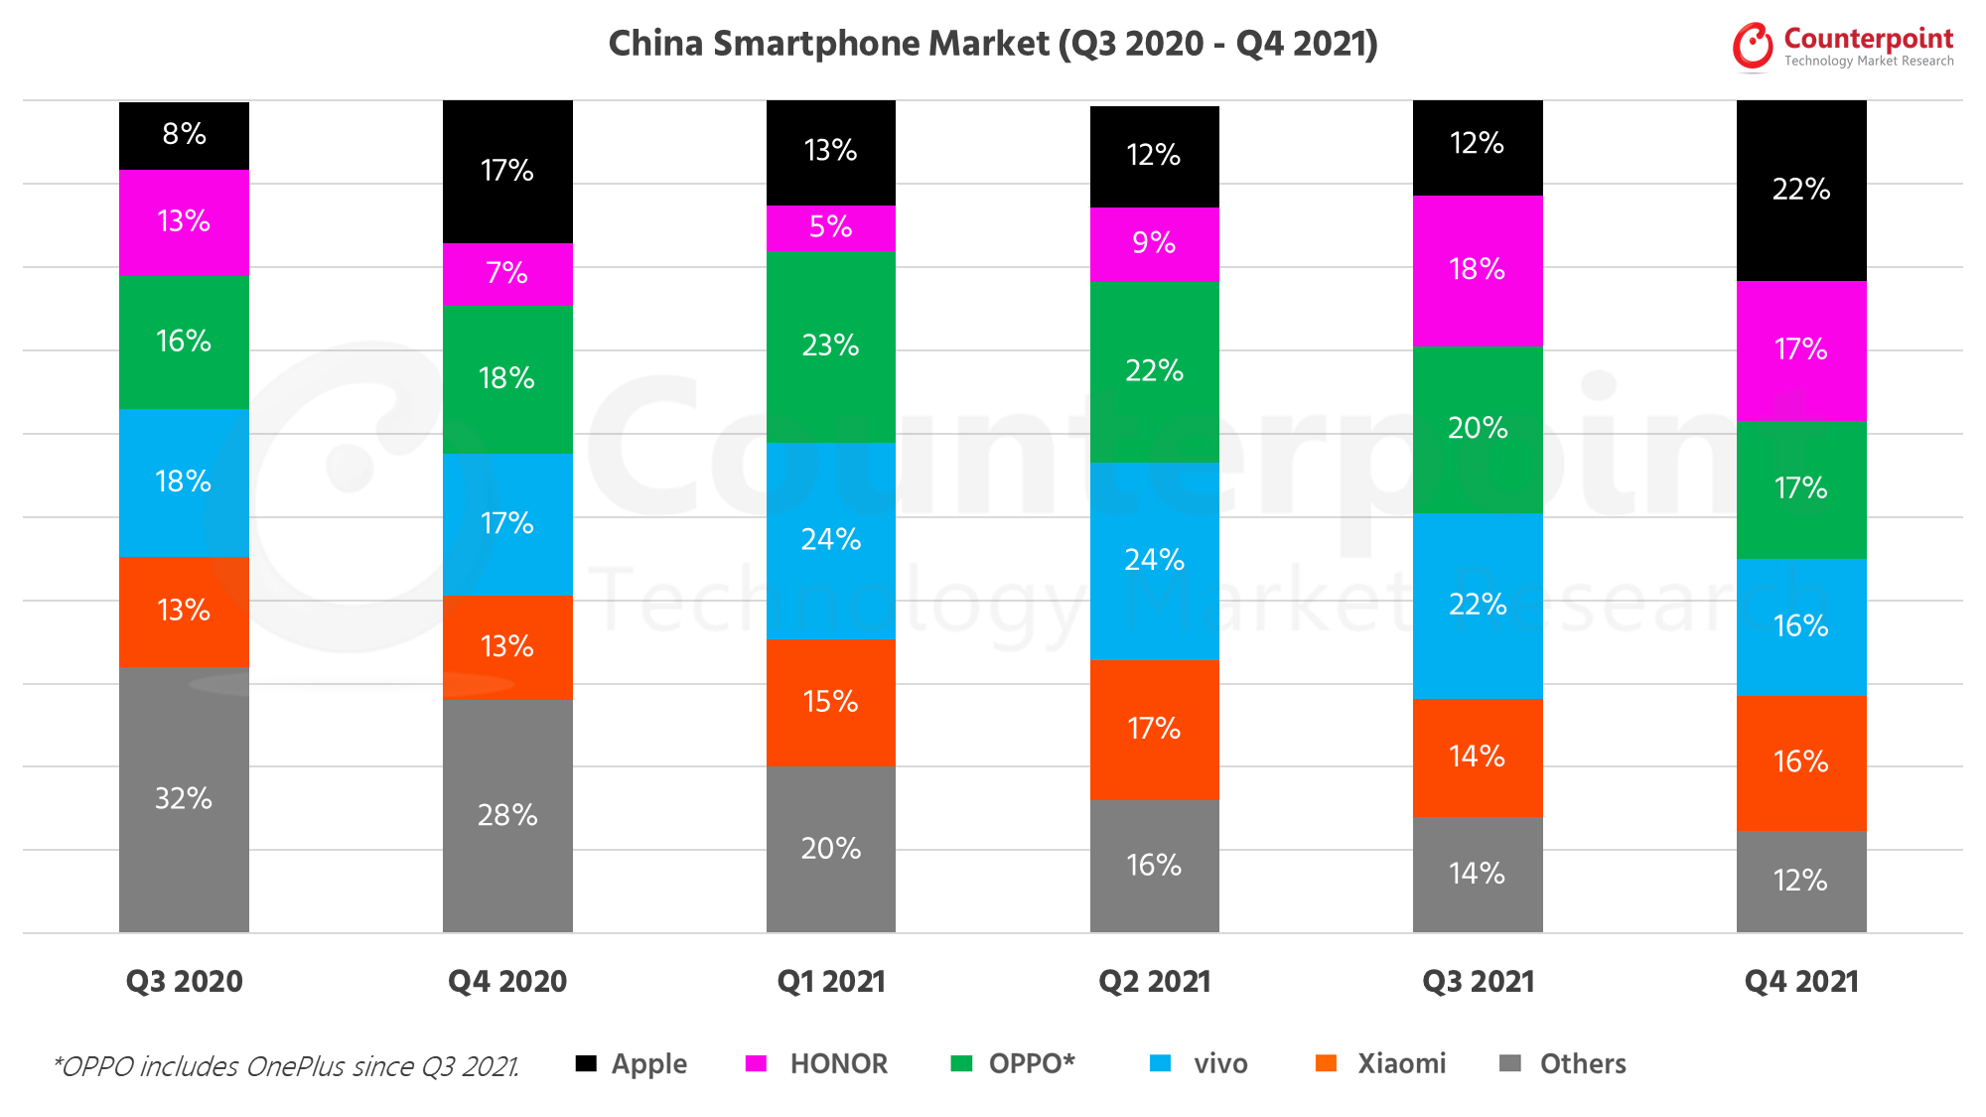 Counterpoint Research China Smartphone Market Share Q4 2021